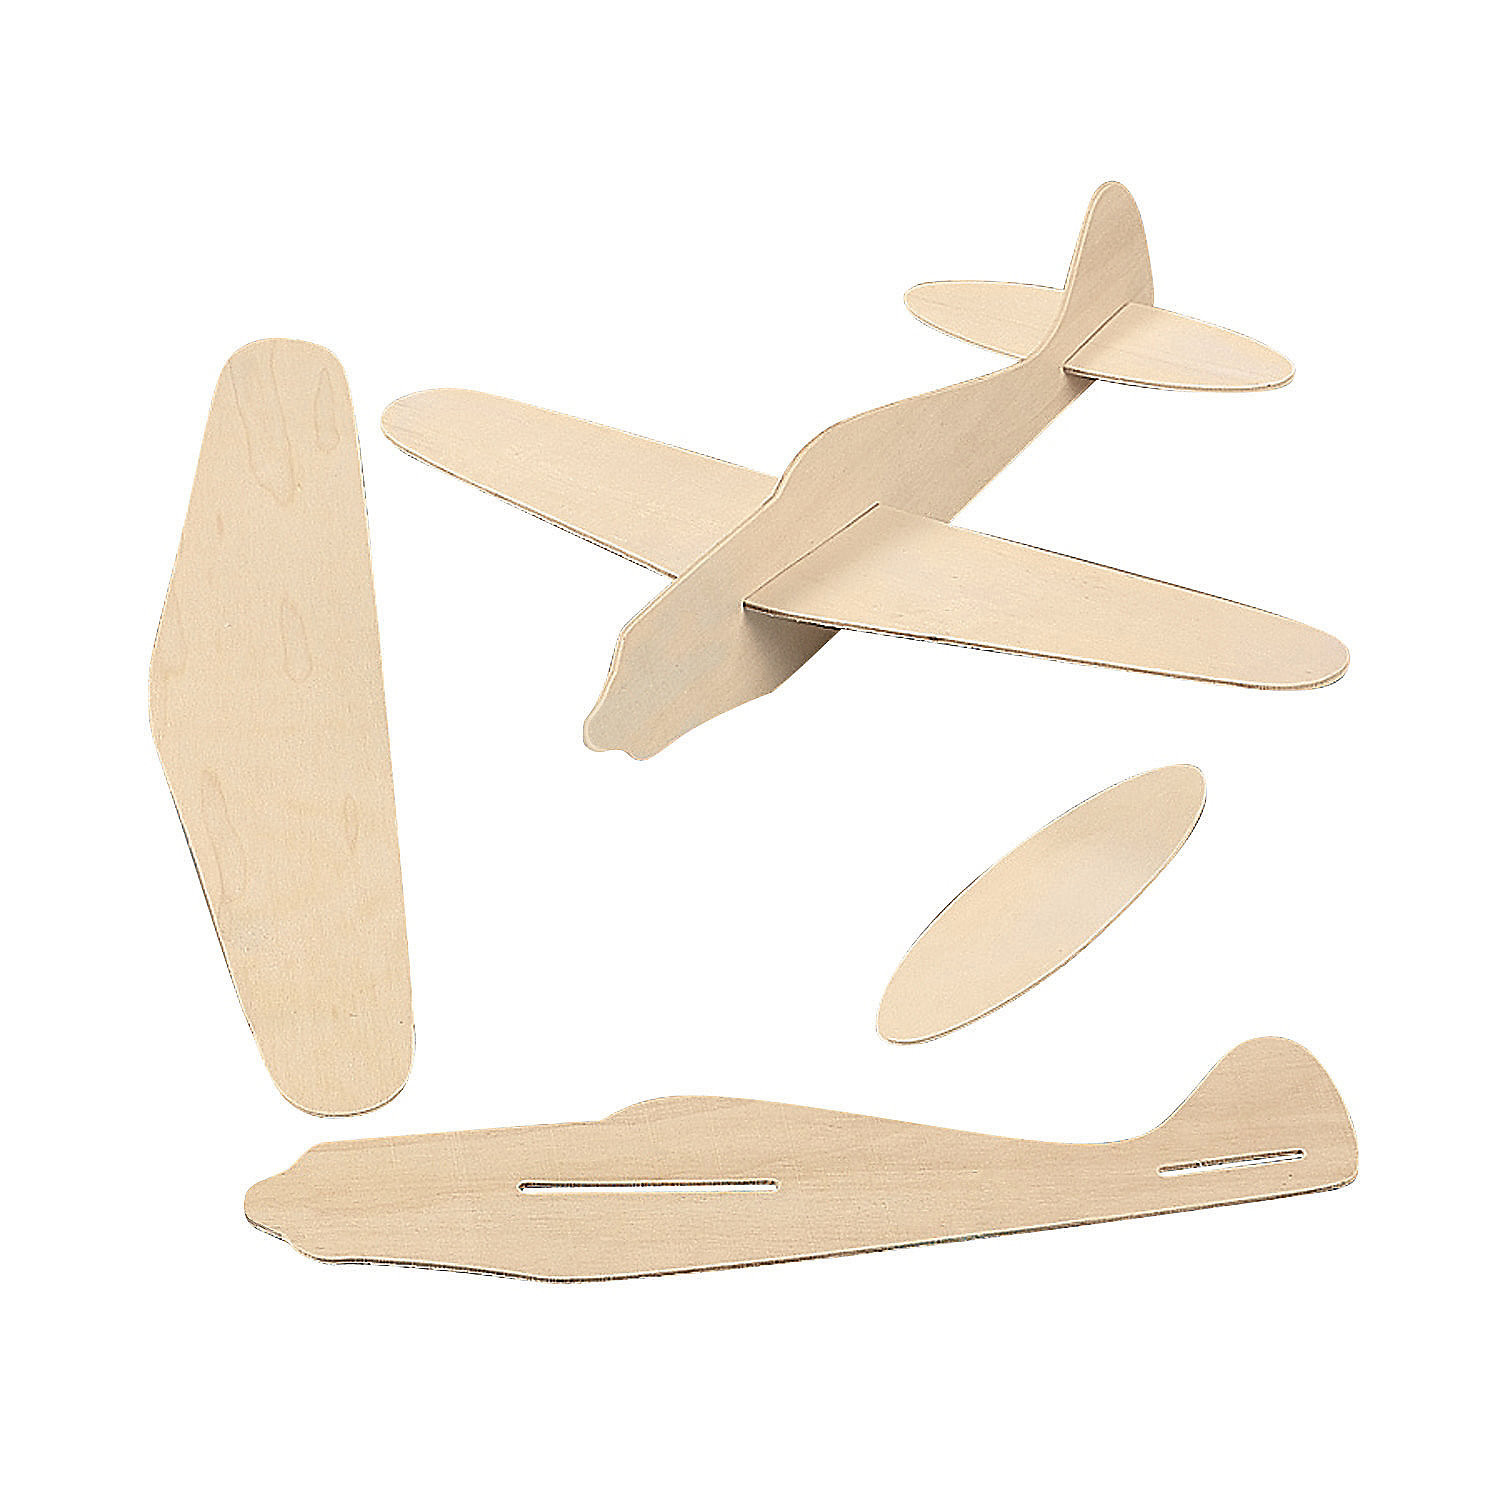 Best ideas about DIY Airplane Kit
. Save or Pin DIY Wood Airplane Kits Oriental Trading Now.